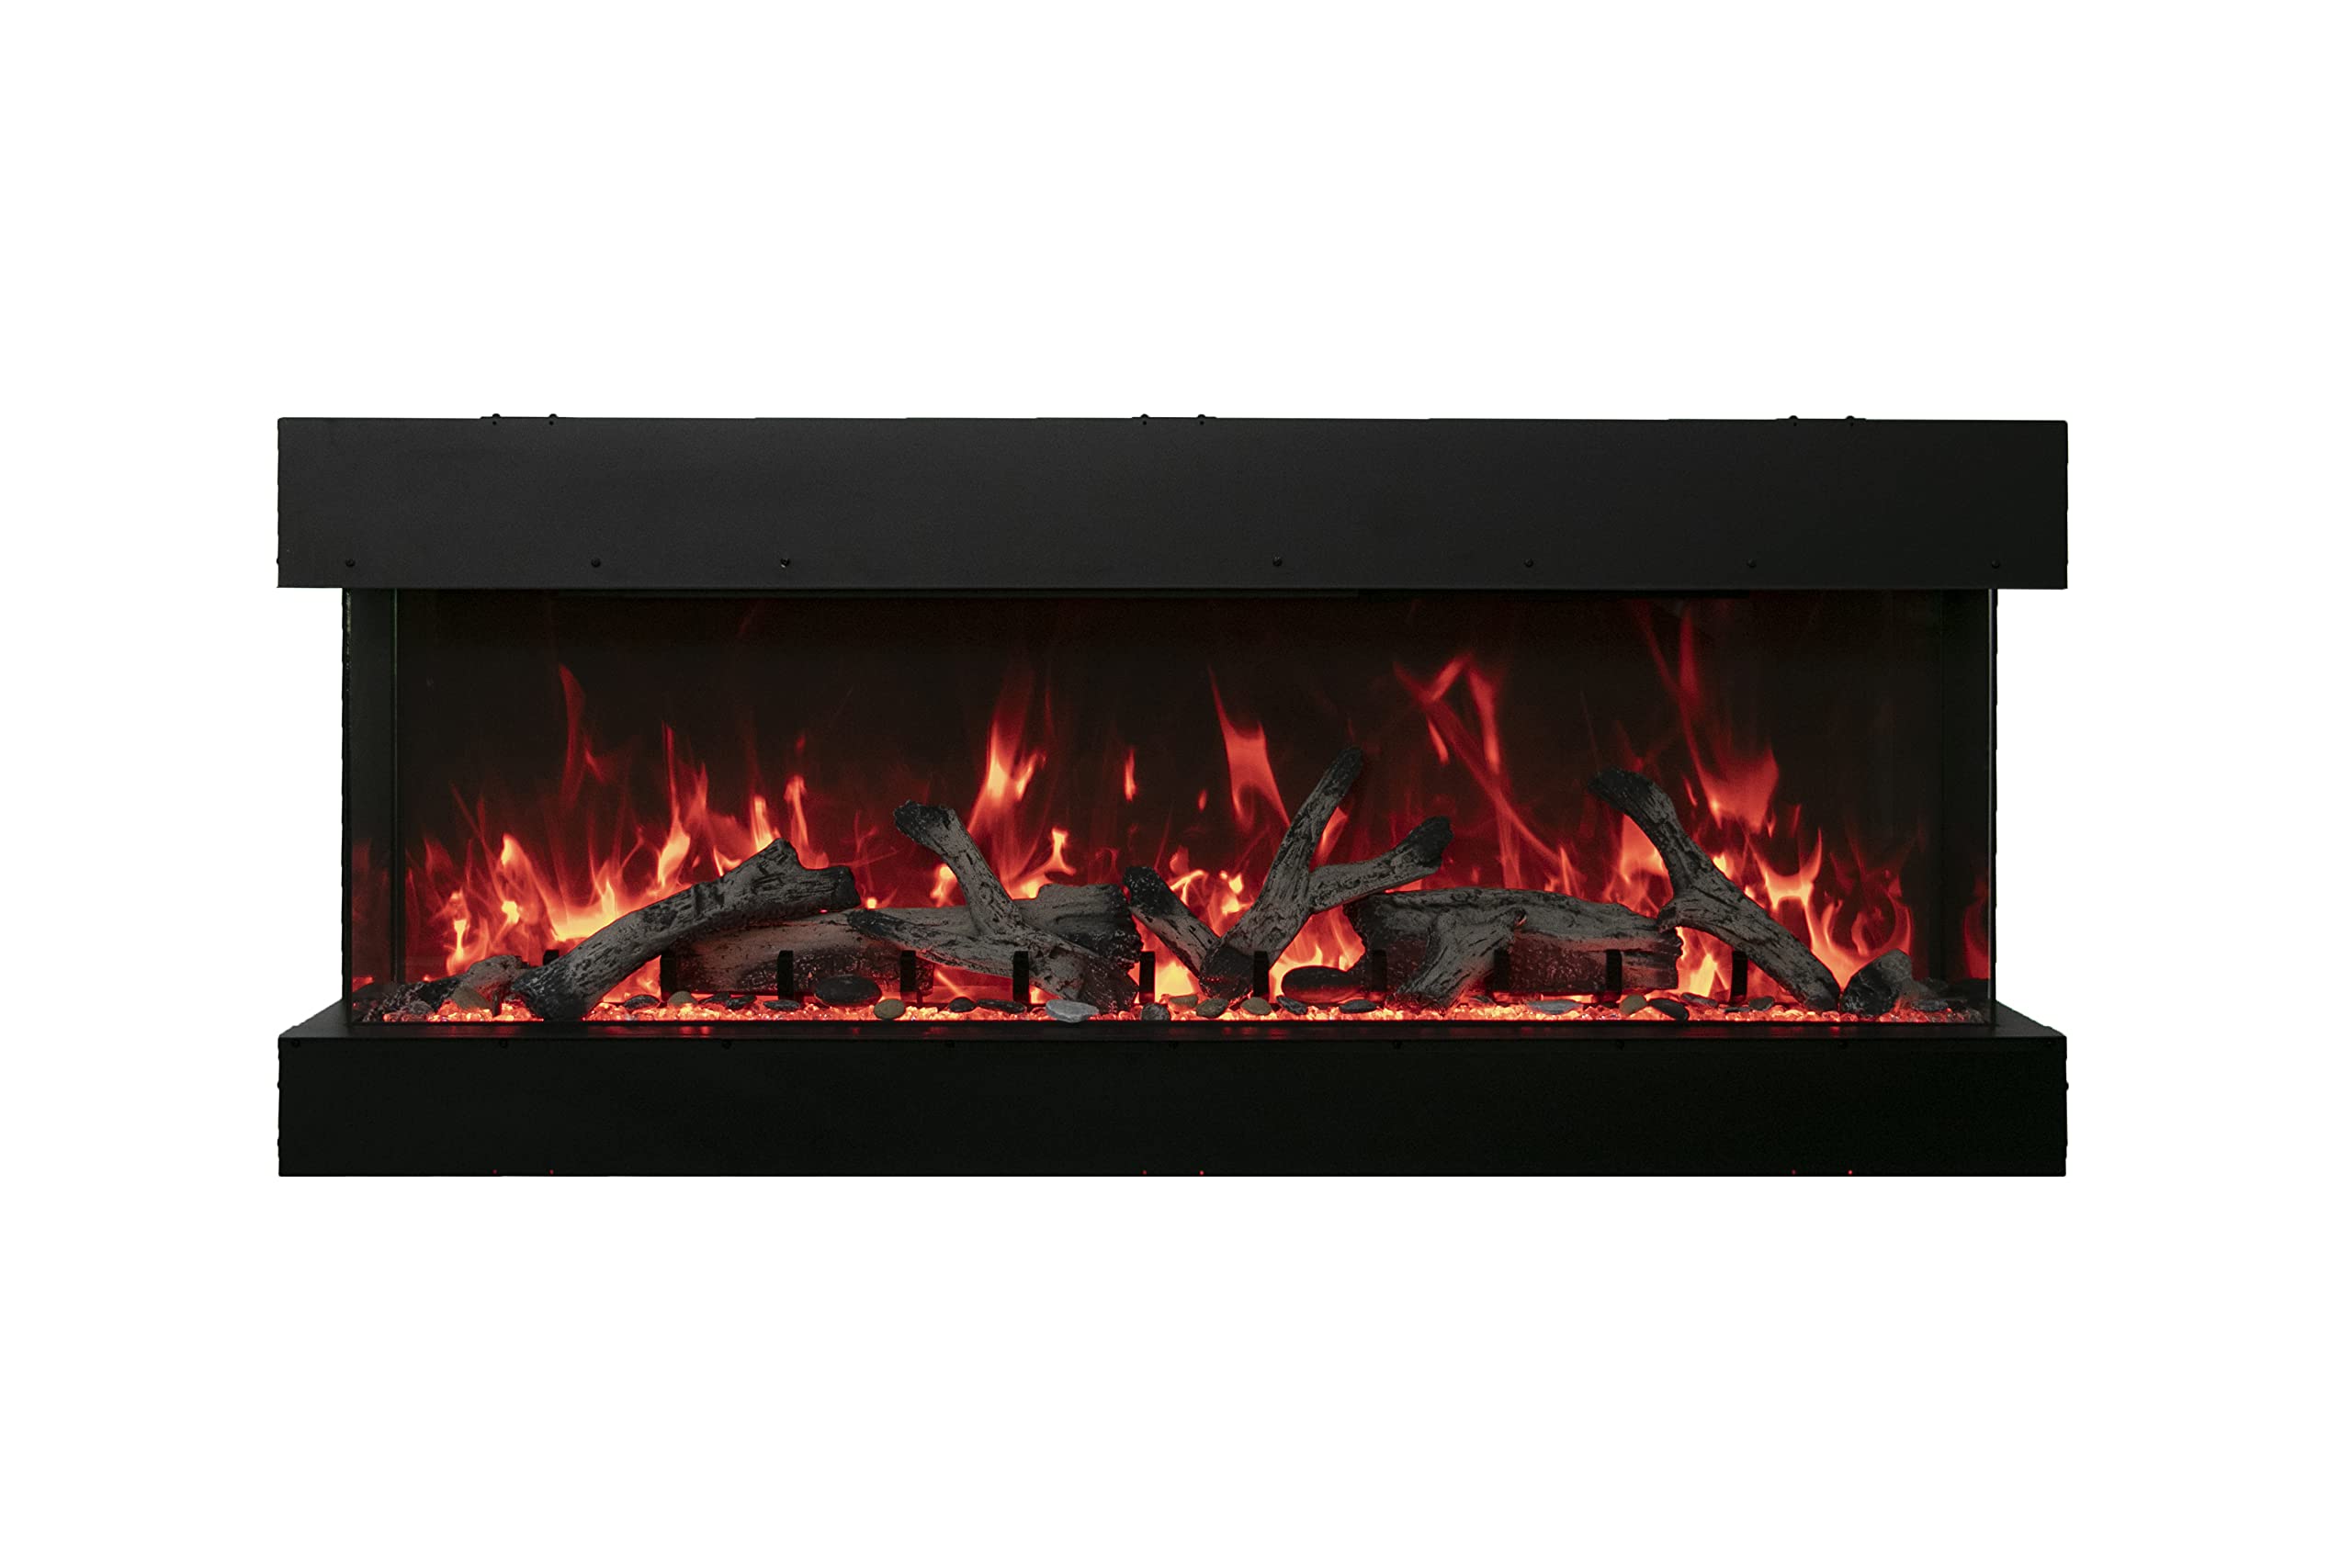 60-TRU-View-XL XT - 3 Sided Electric Fireplace 60 Inch, 3-Sided Glass Fireplace Heater w/Remote Control & 8H Timer, Thermostat, Black, Adjustable Brightness, Realistic Flame Effects